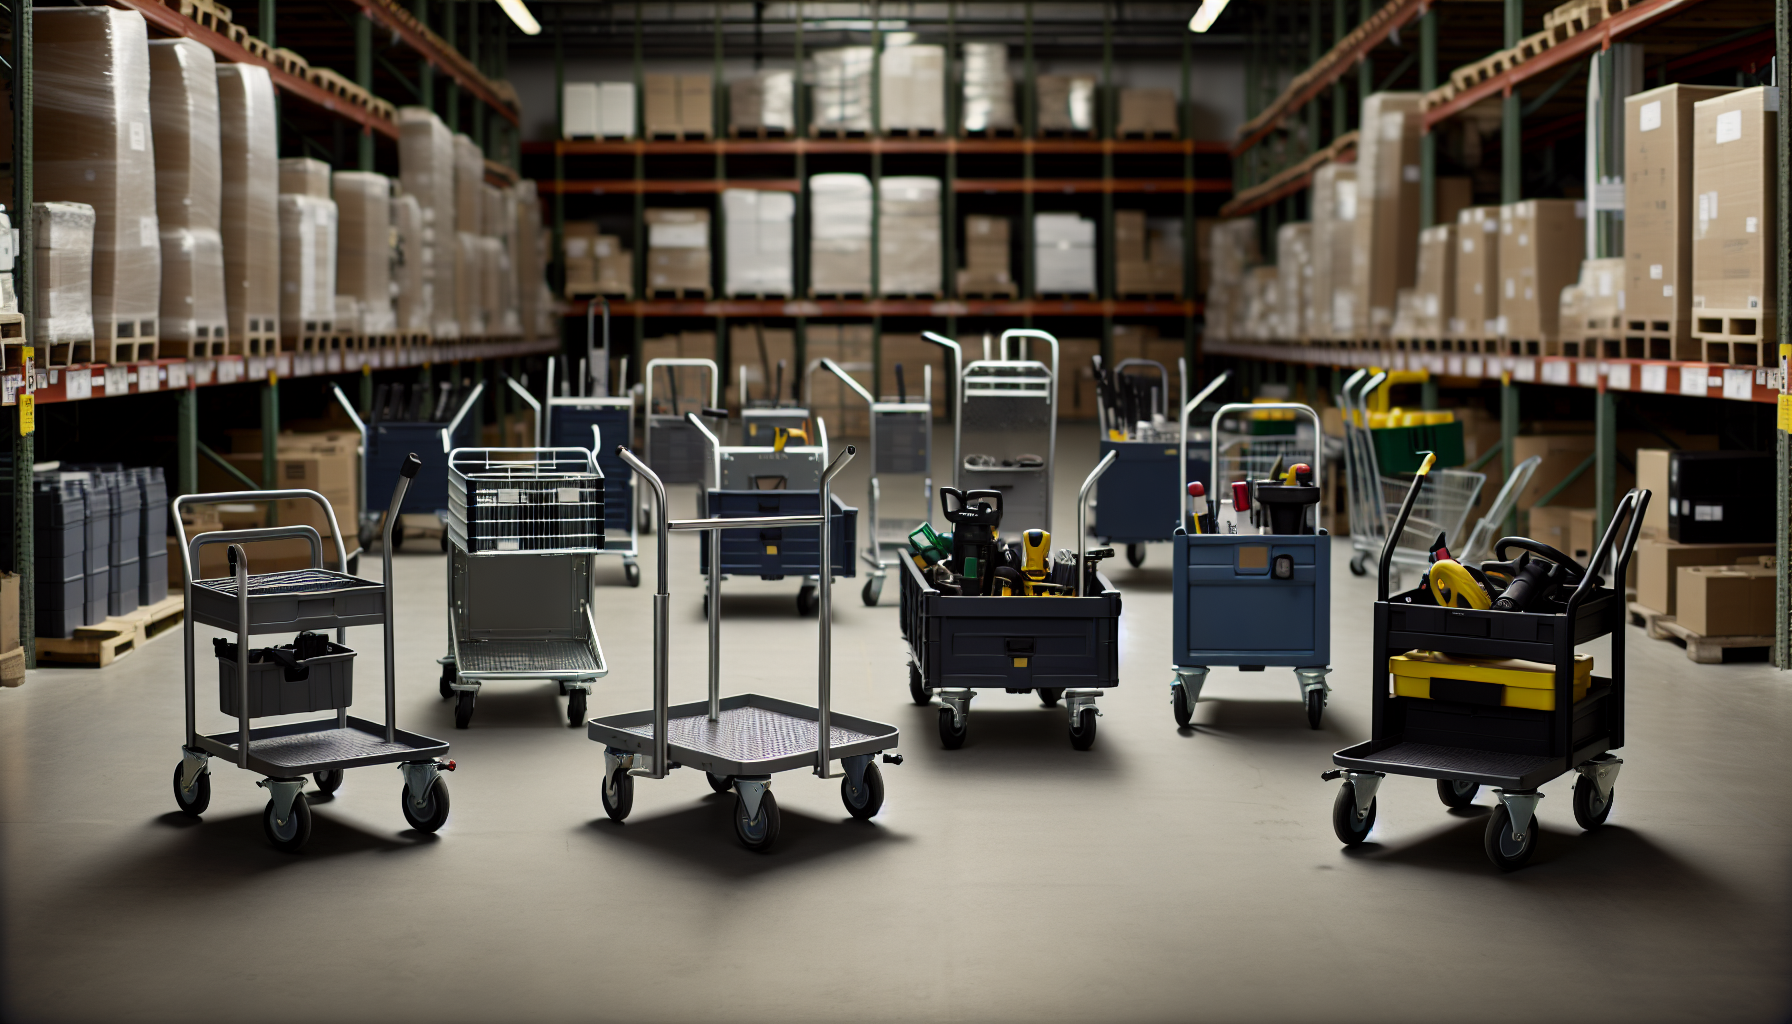 Various utility carts in a warehouse setting